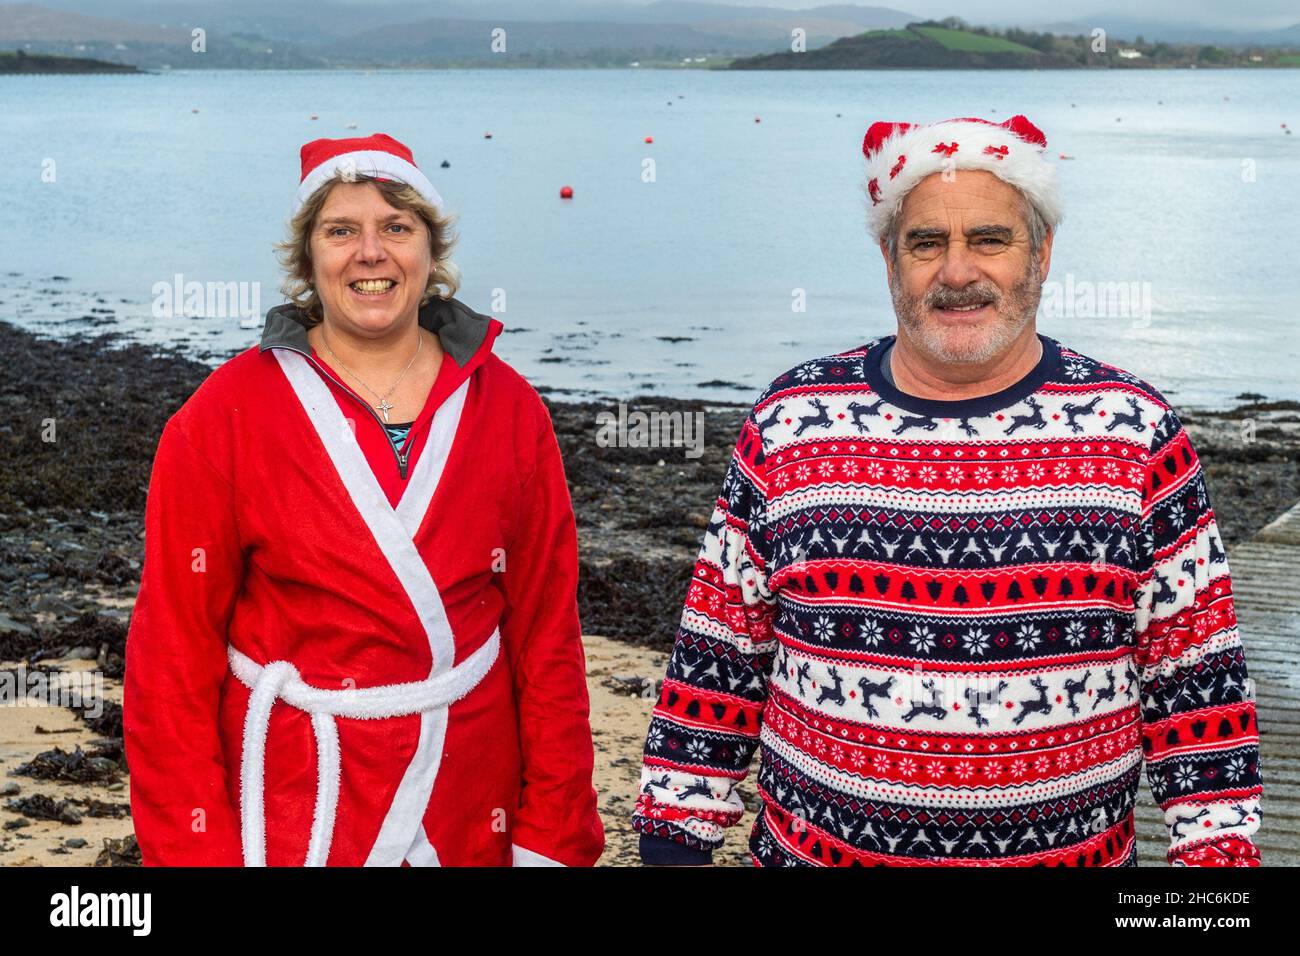 Bantry, West Cork, Ireland. 25th Dec, 2021. A number of people went for a Christmas swim in Bantry this afternoon in a flat calm sea. Preparing to have a dip were Sonia Taylor and Shane Begley from Bantry. Credit: AG News/Alamy Live News Stock Photo